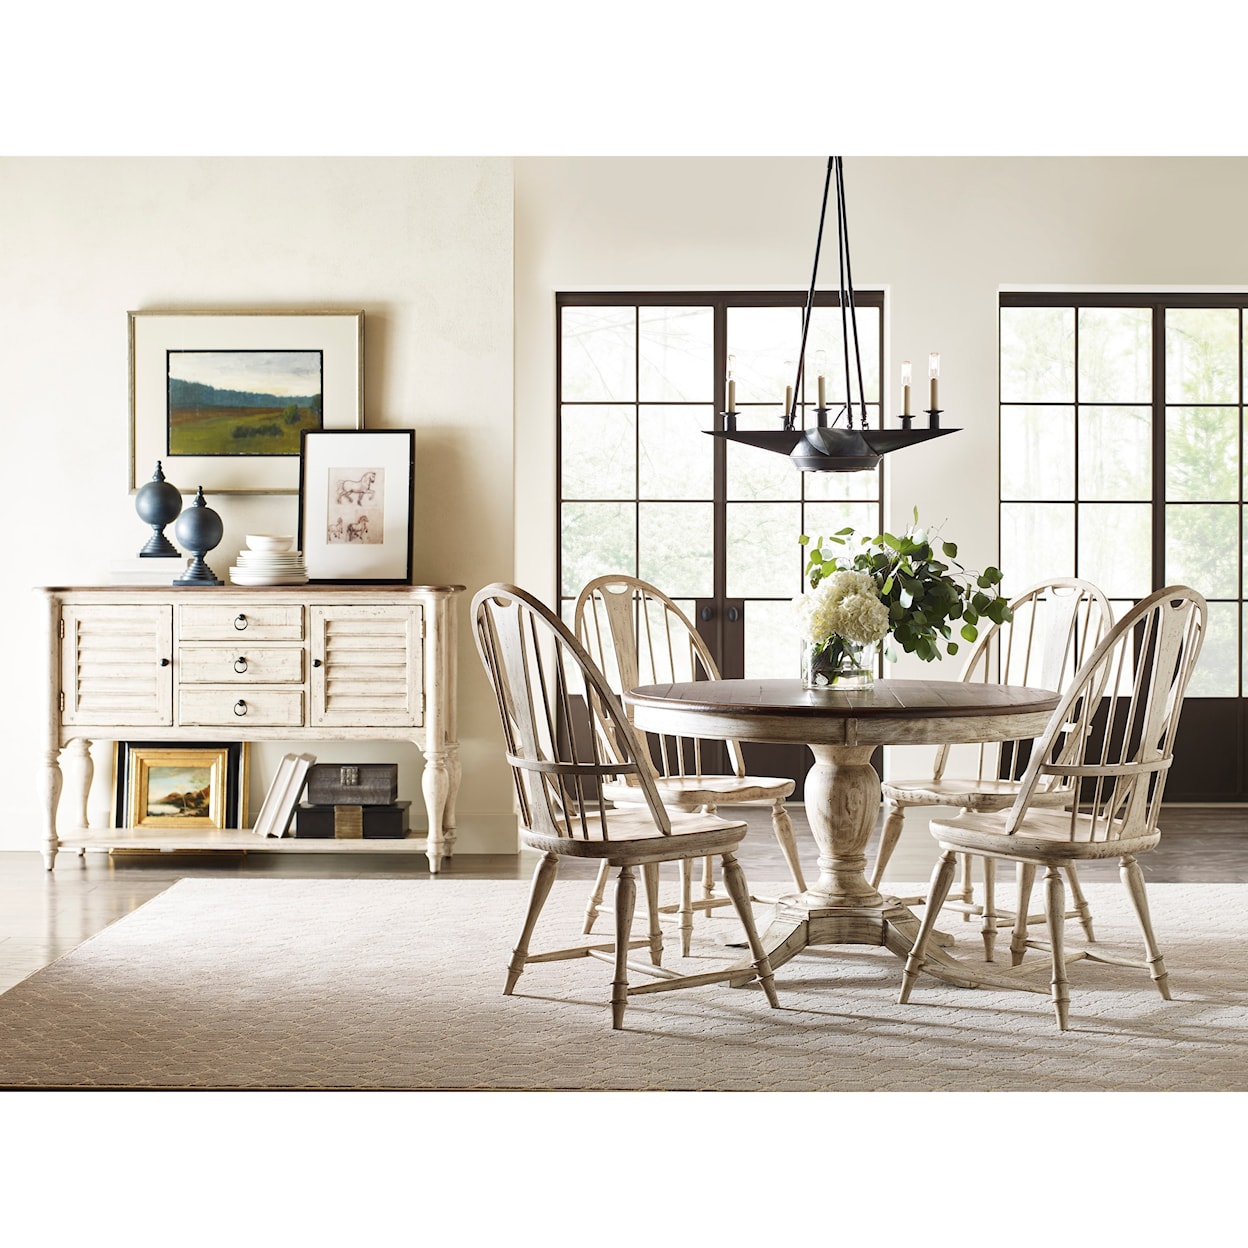 Kincaid Furniture Weatherford Casual Dining Room Group